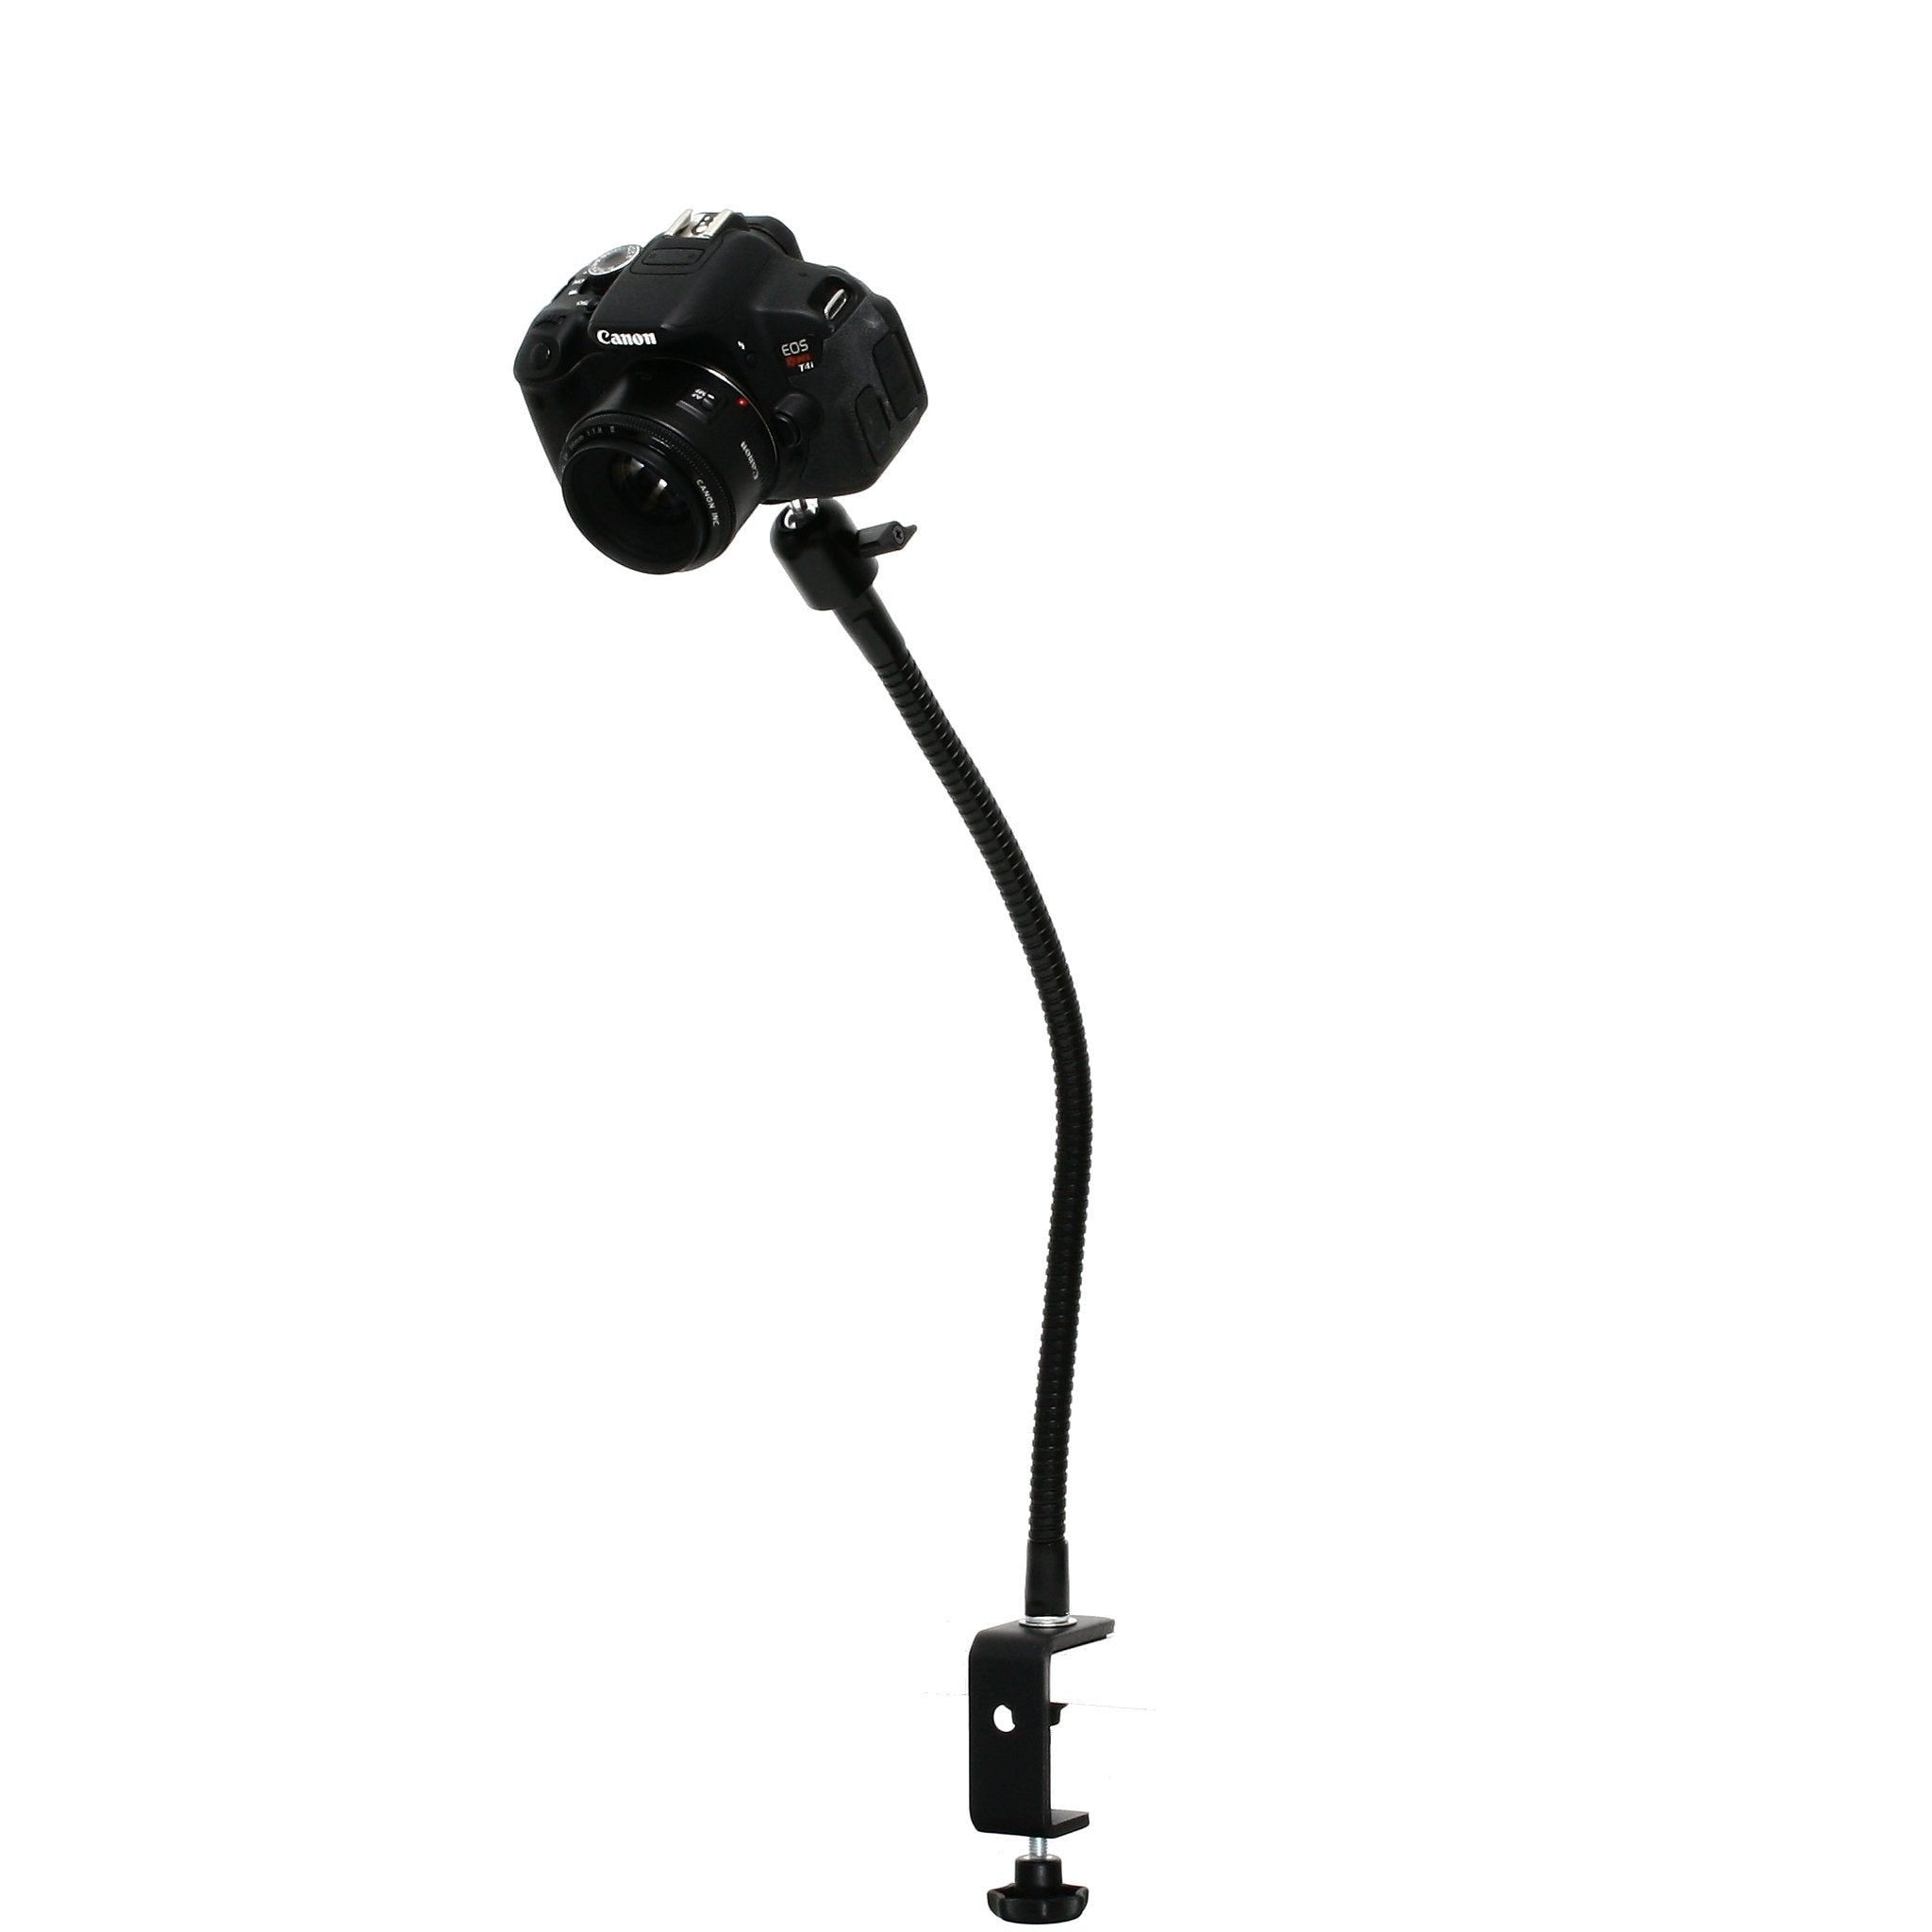 SnakeClamp 18 Heavy-Duty Black Flexible Arm Camera Stand with Table Clamp